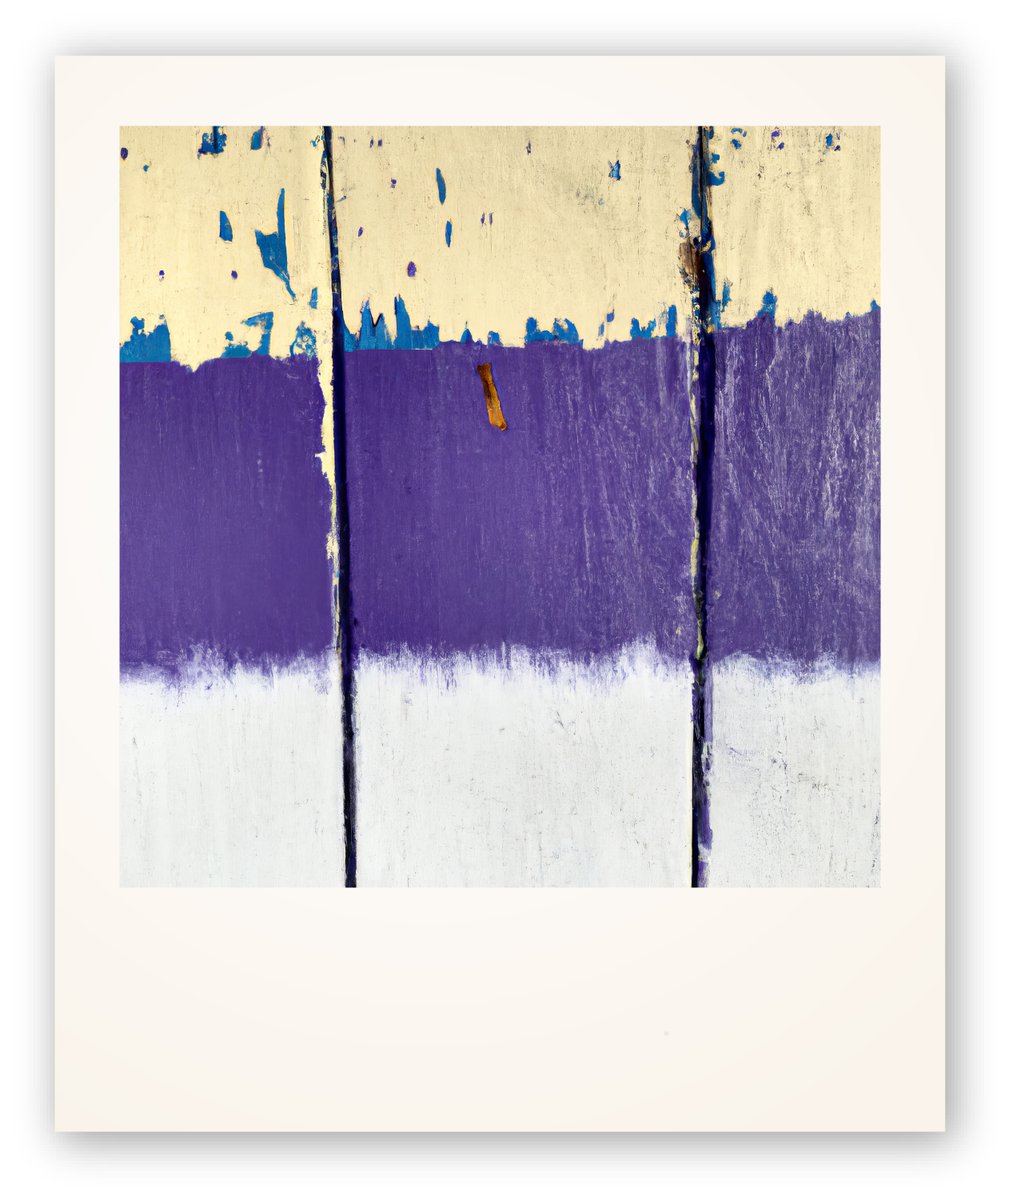 From my revisited Polaroids series.                  

Urban Abstracts                 

'Purple Haze'